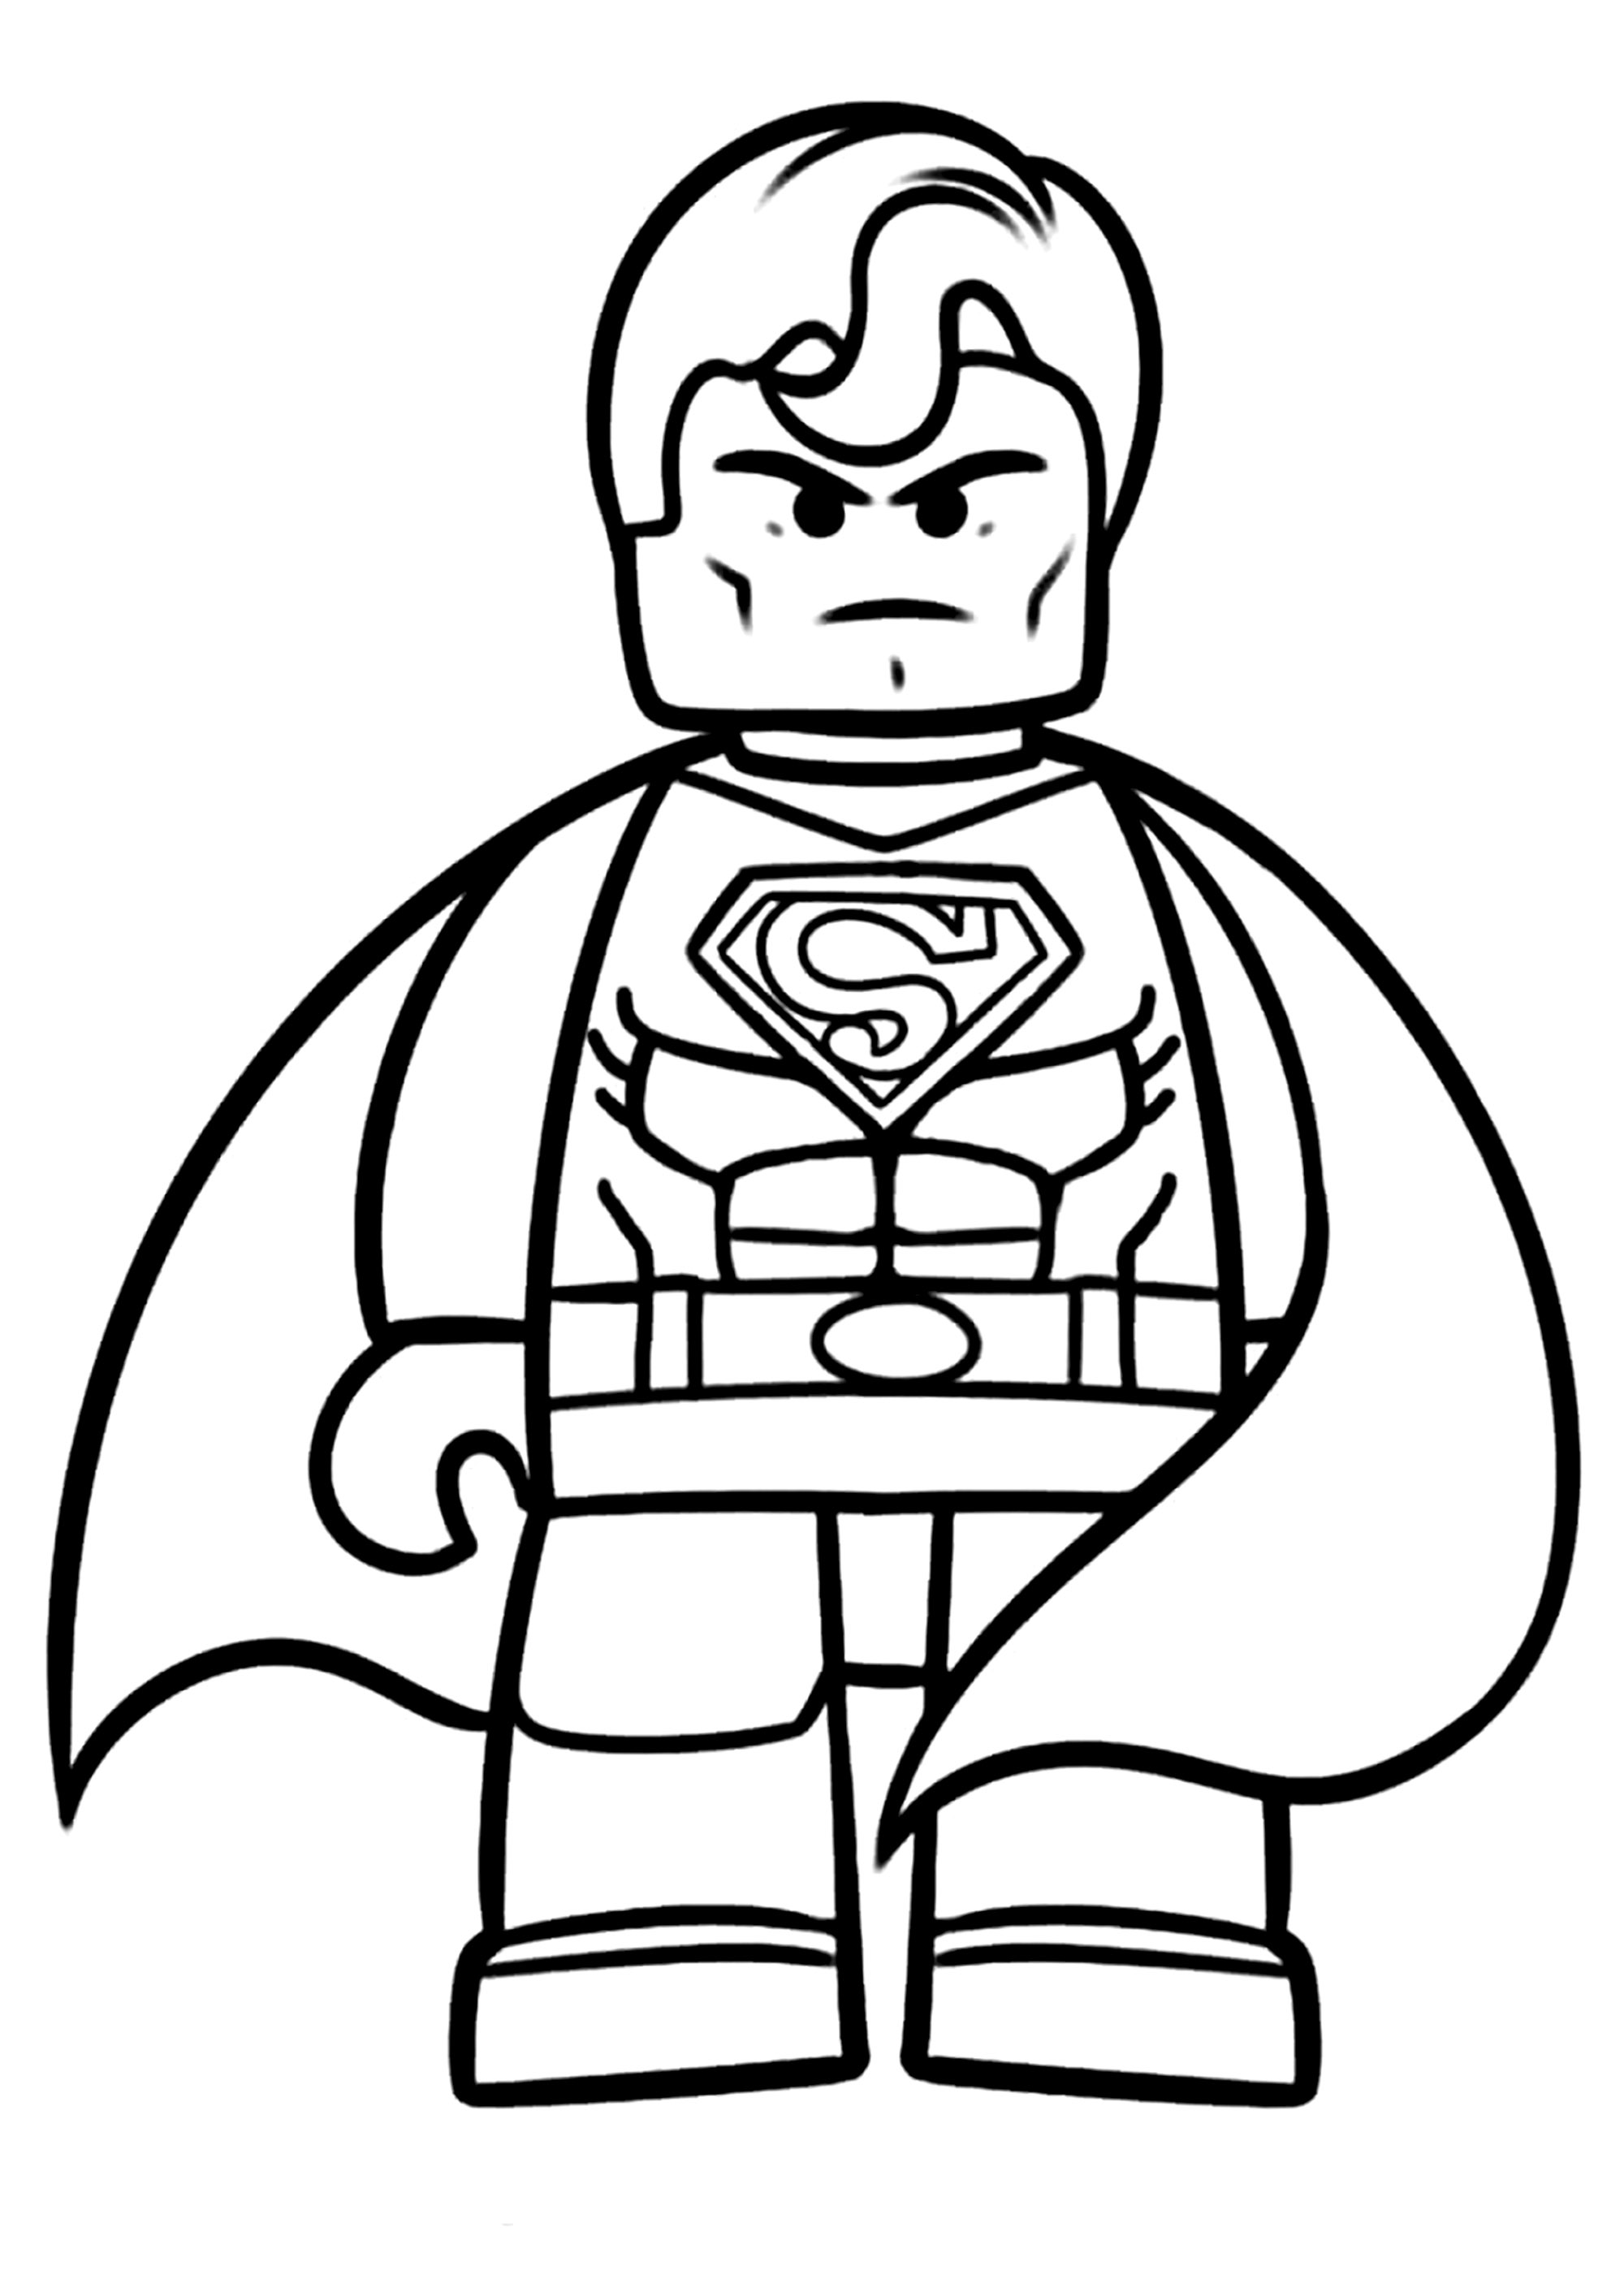 Superman Lego - Lego Kids Coloring Pages